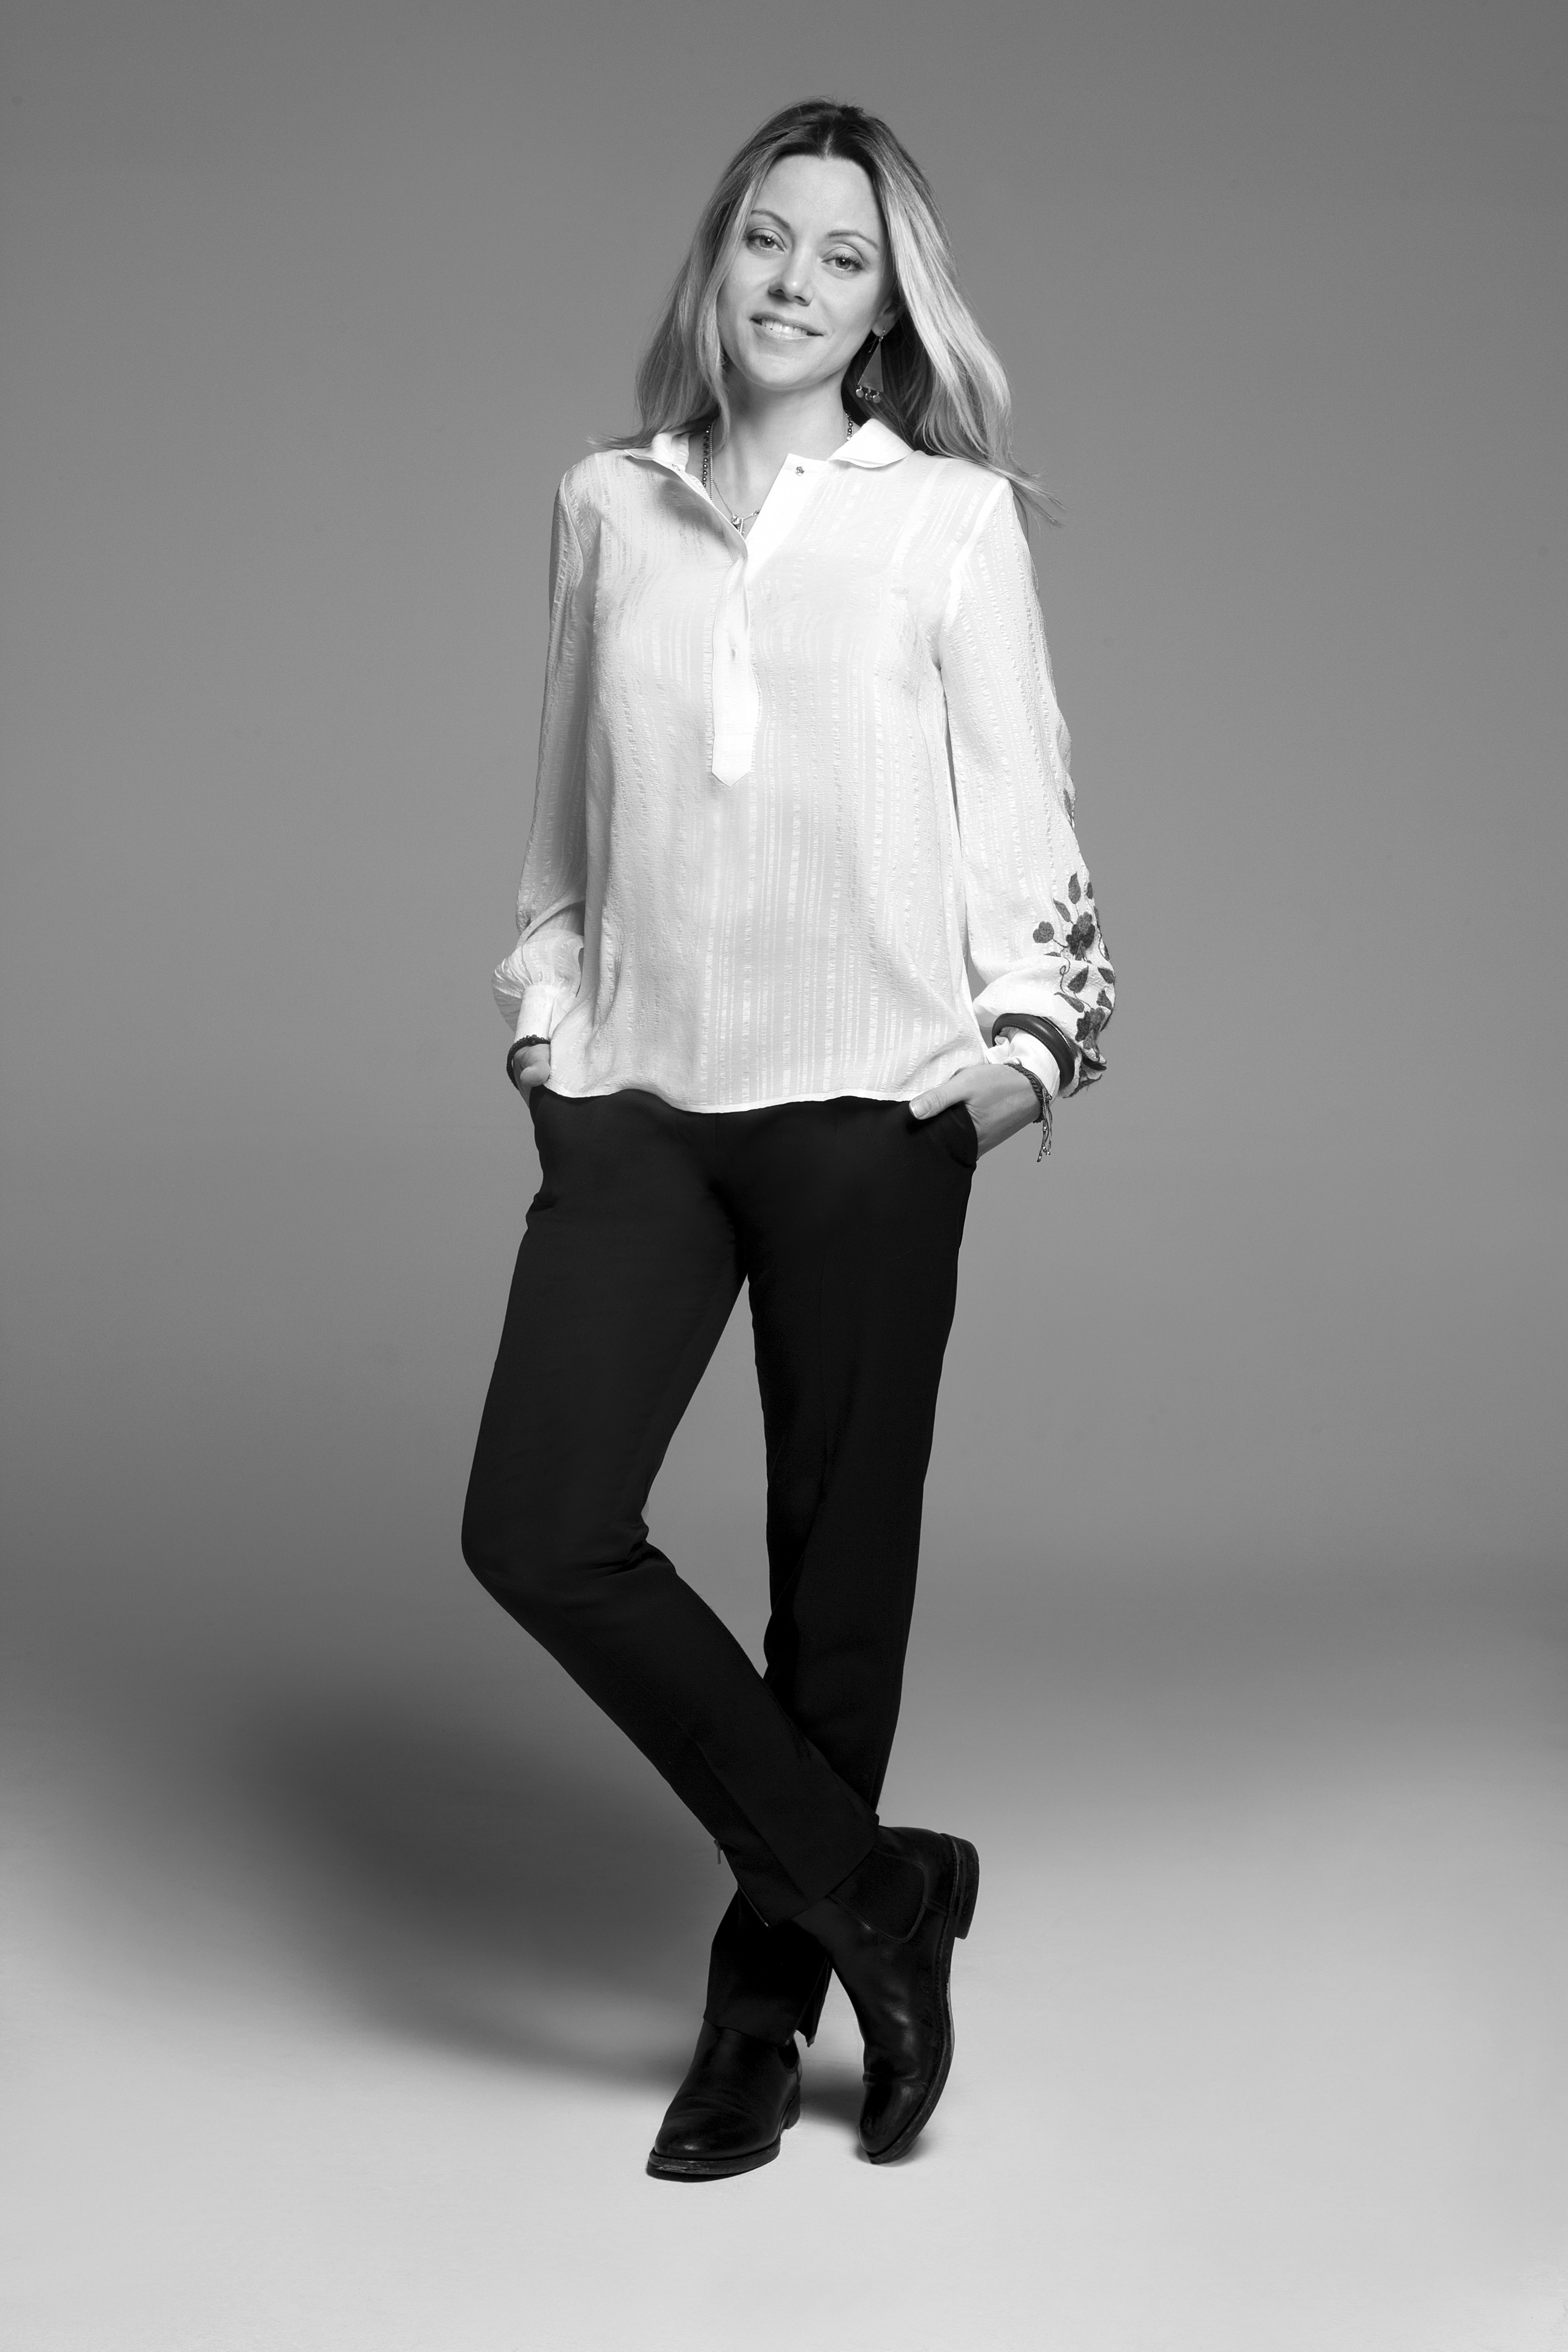 Dimitra Kolotoura, founder of ZEUS+DIONE in ivory Hera blouse